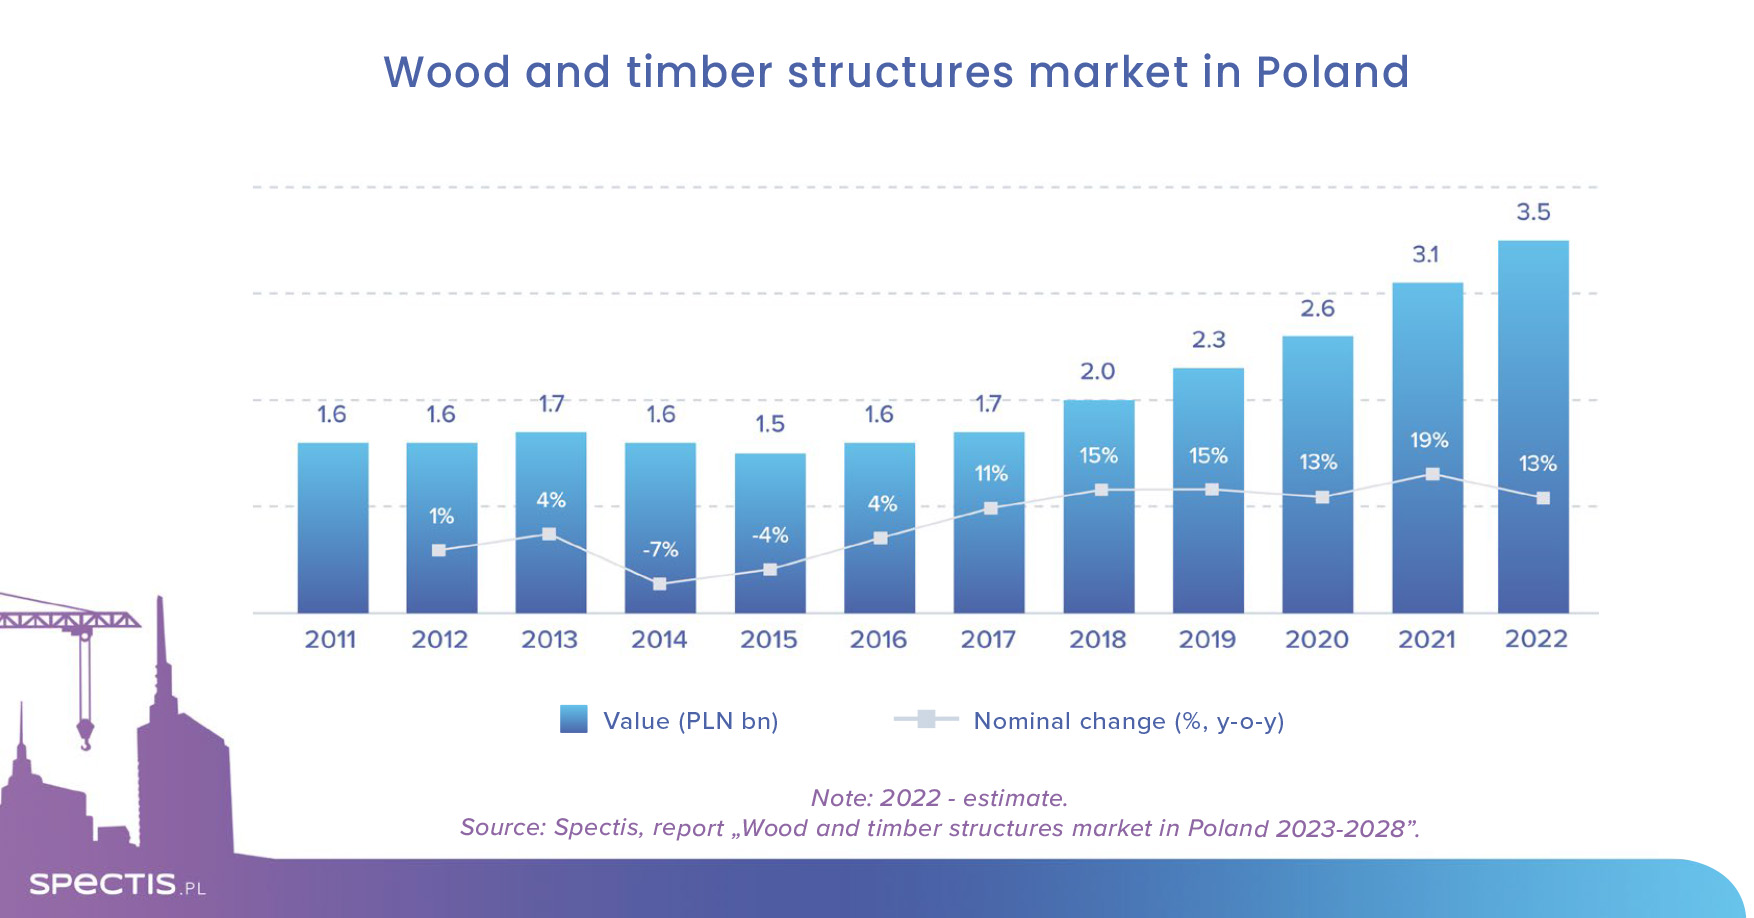 The value of the Polish wood and timber structures market is already over PLN 3bn